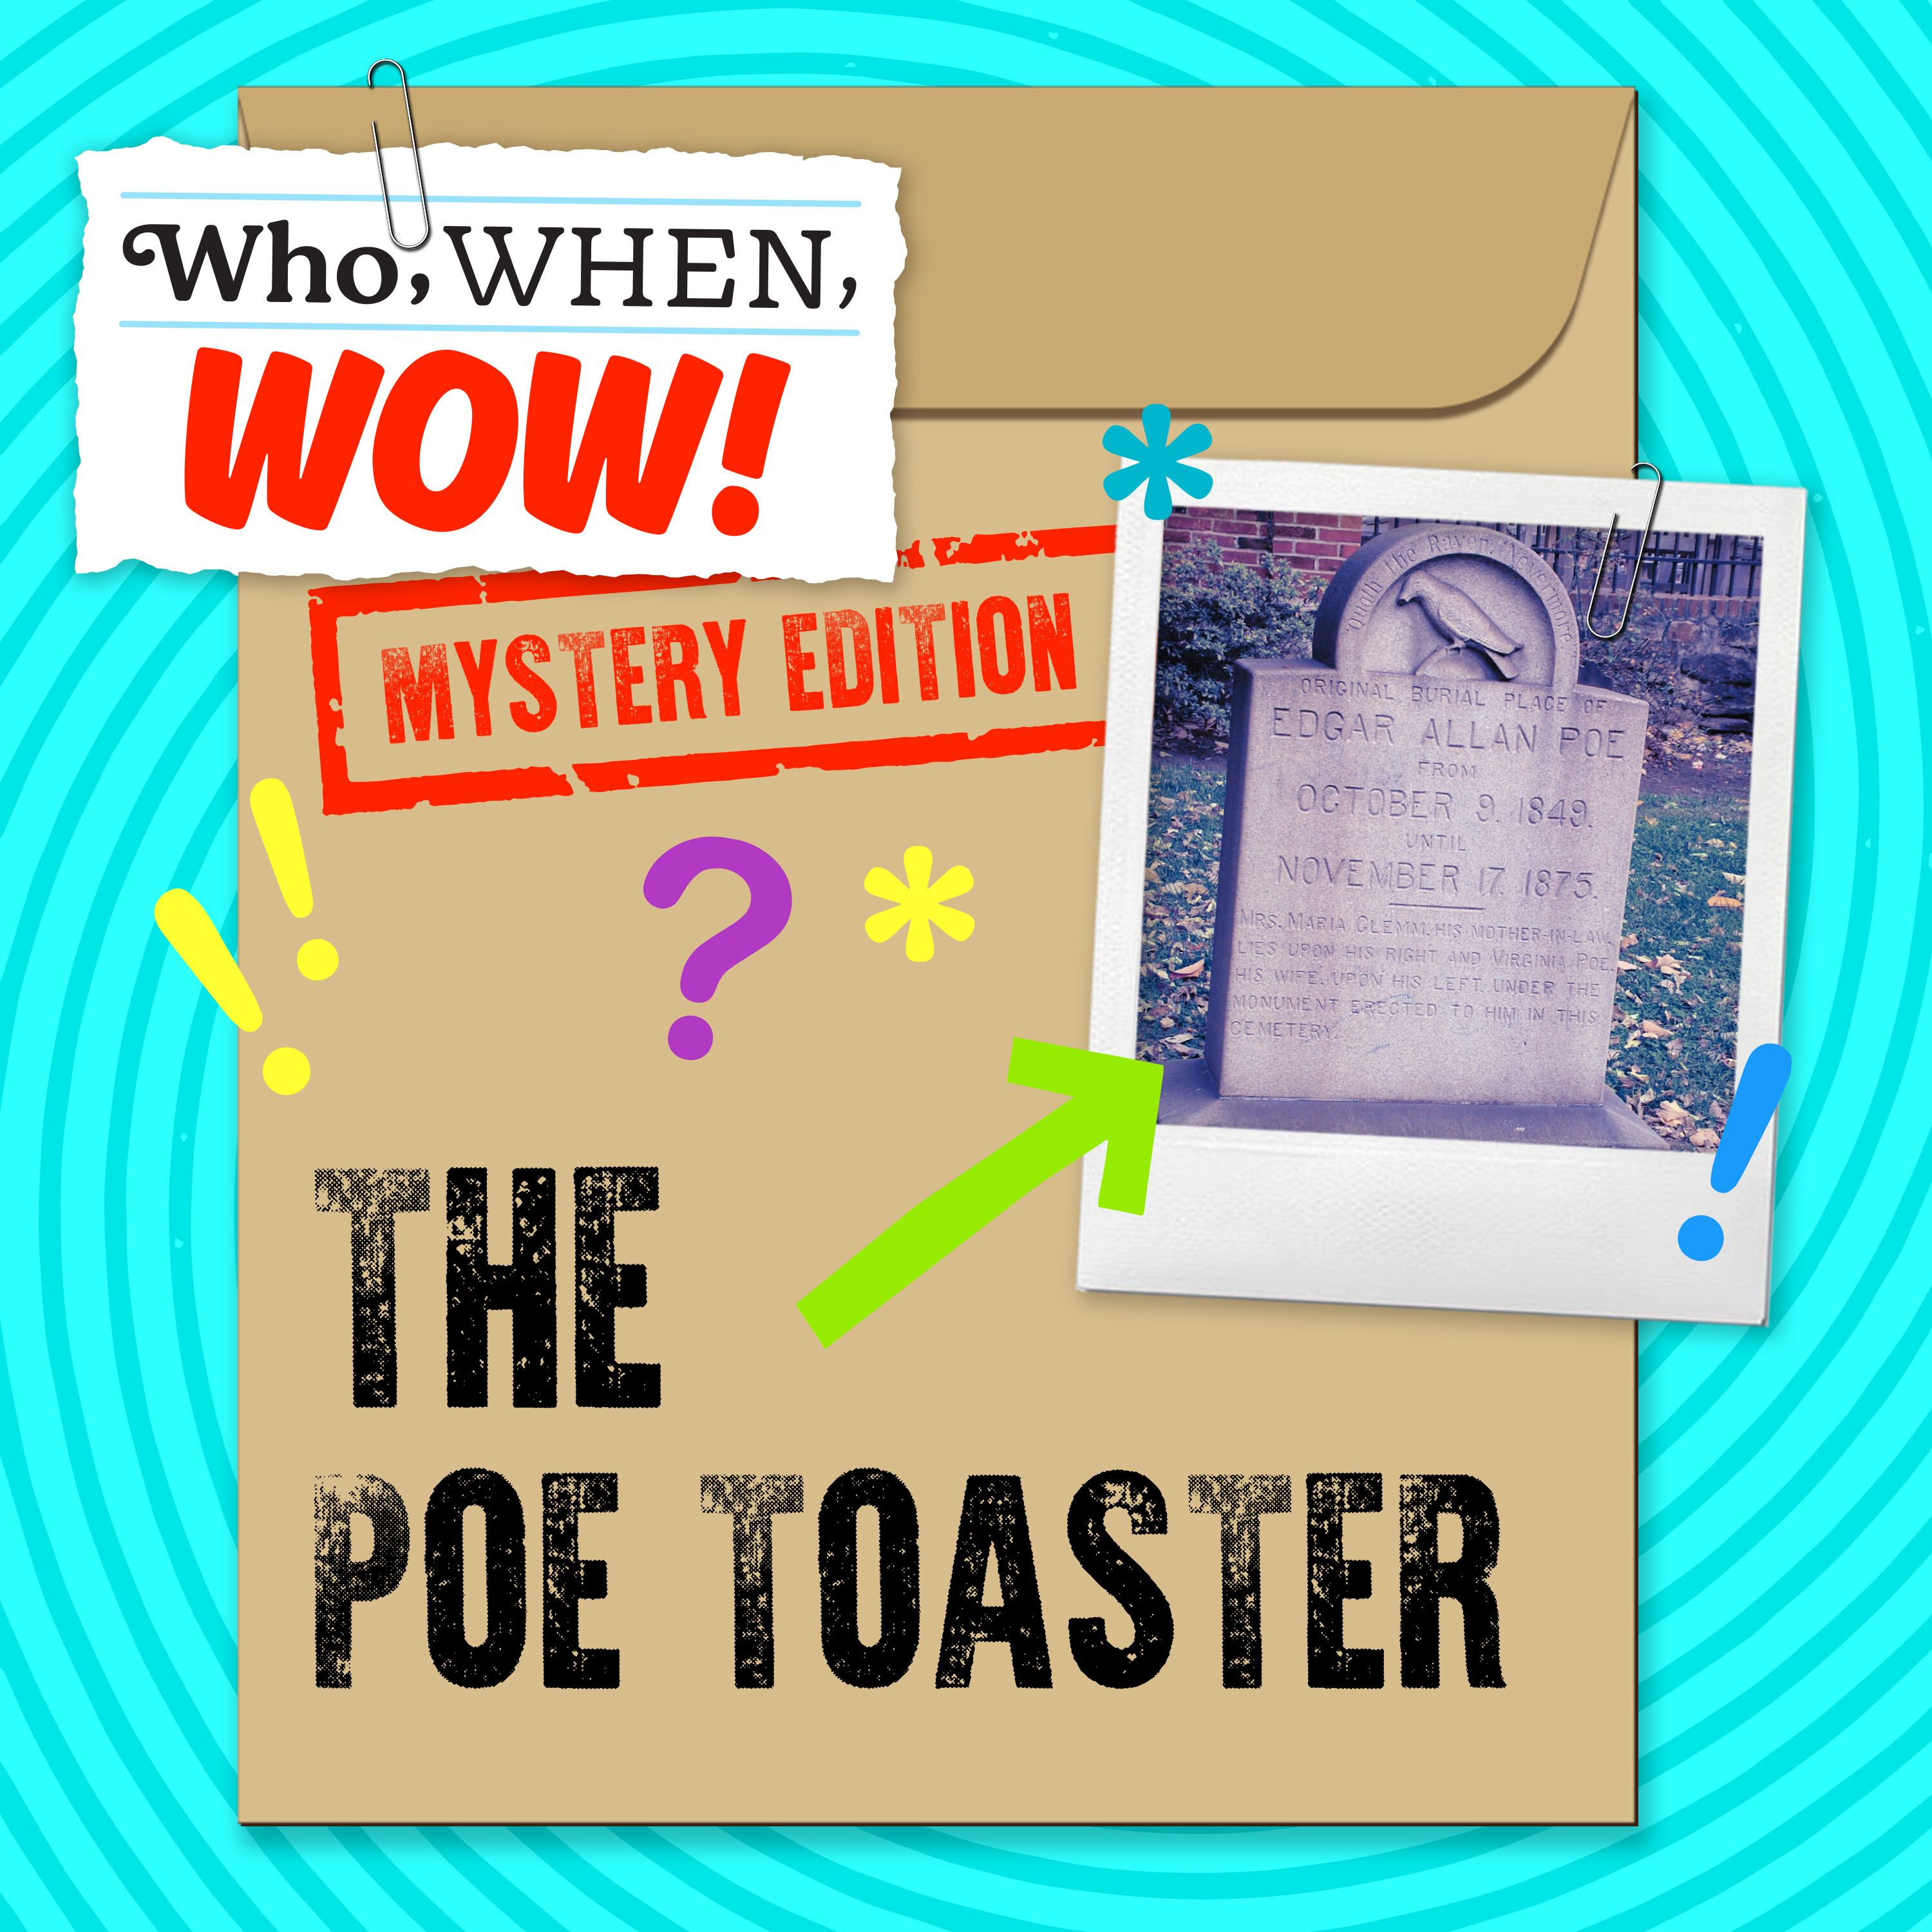 The Poe Toaster (3/6/24)